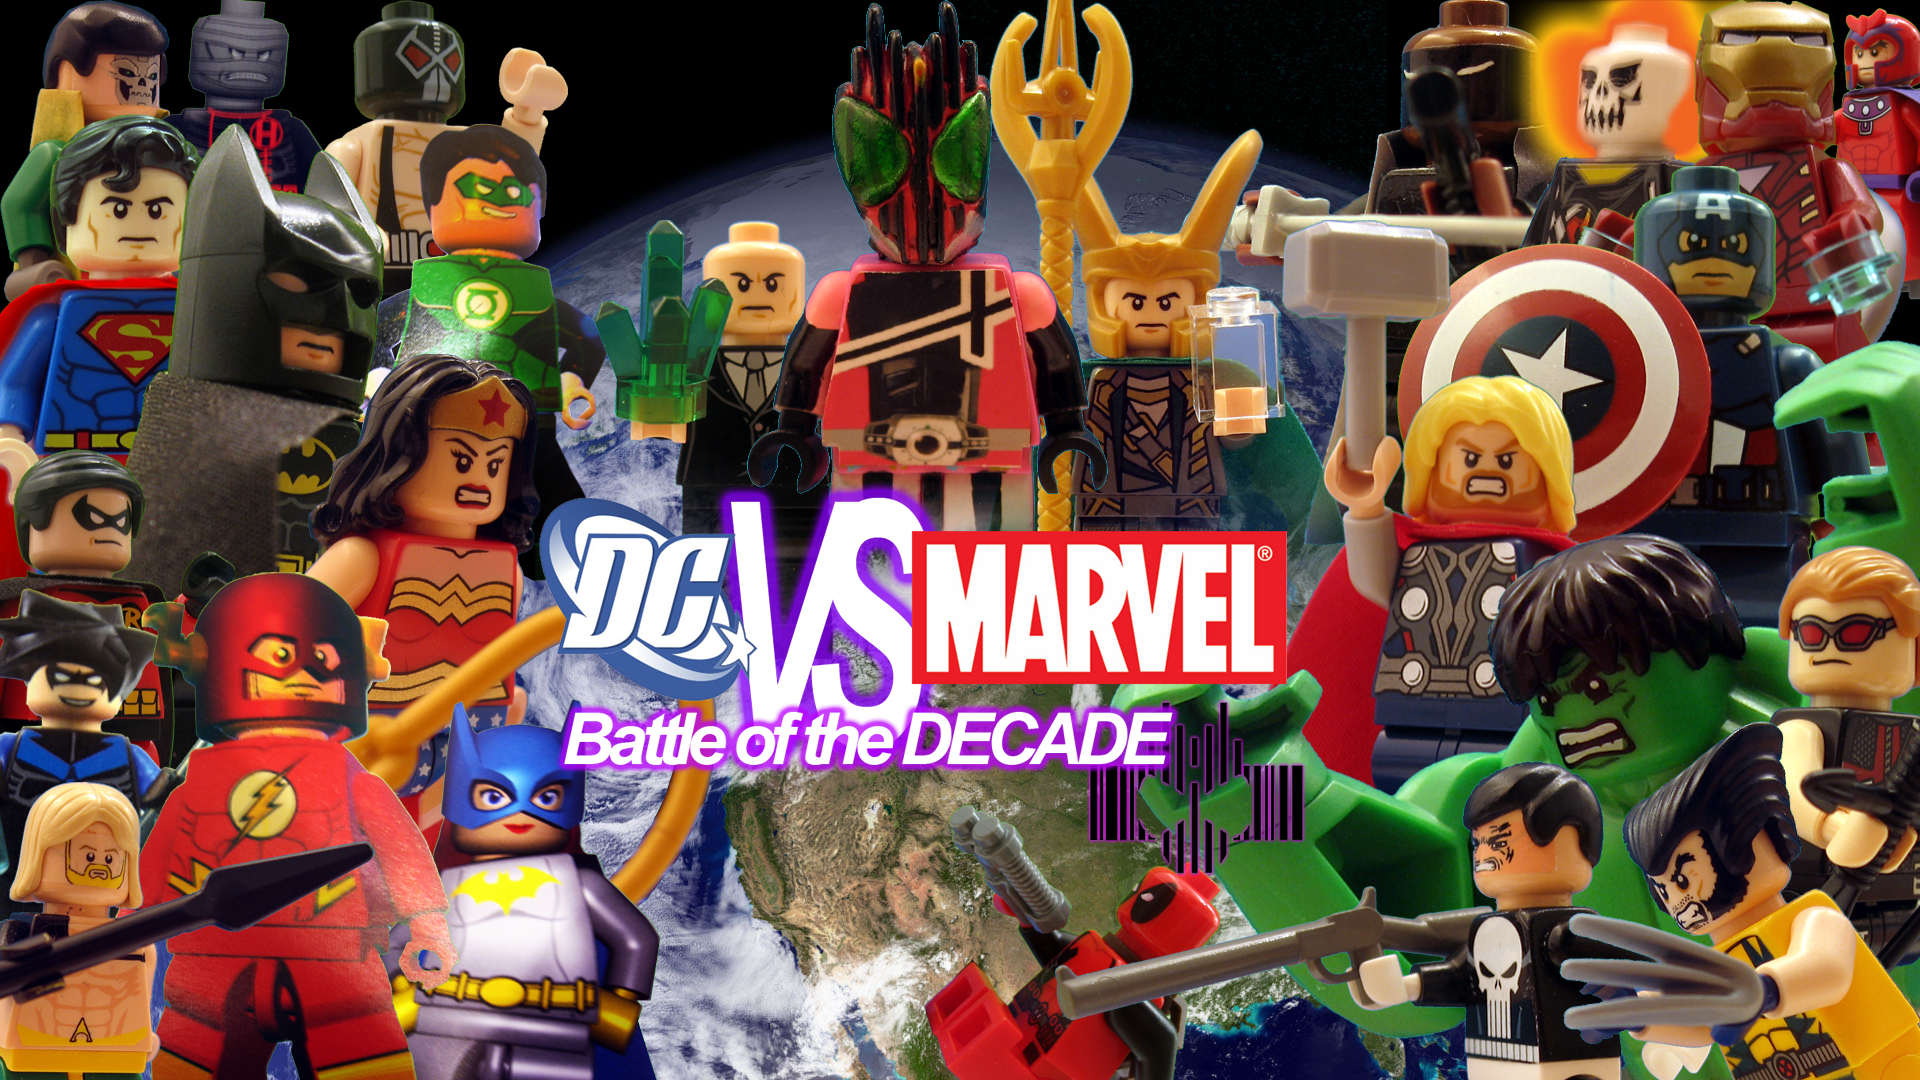 LEGO DC VS MARVEL Battle of the Decade Wallpaper by Digger318 on